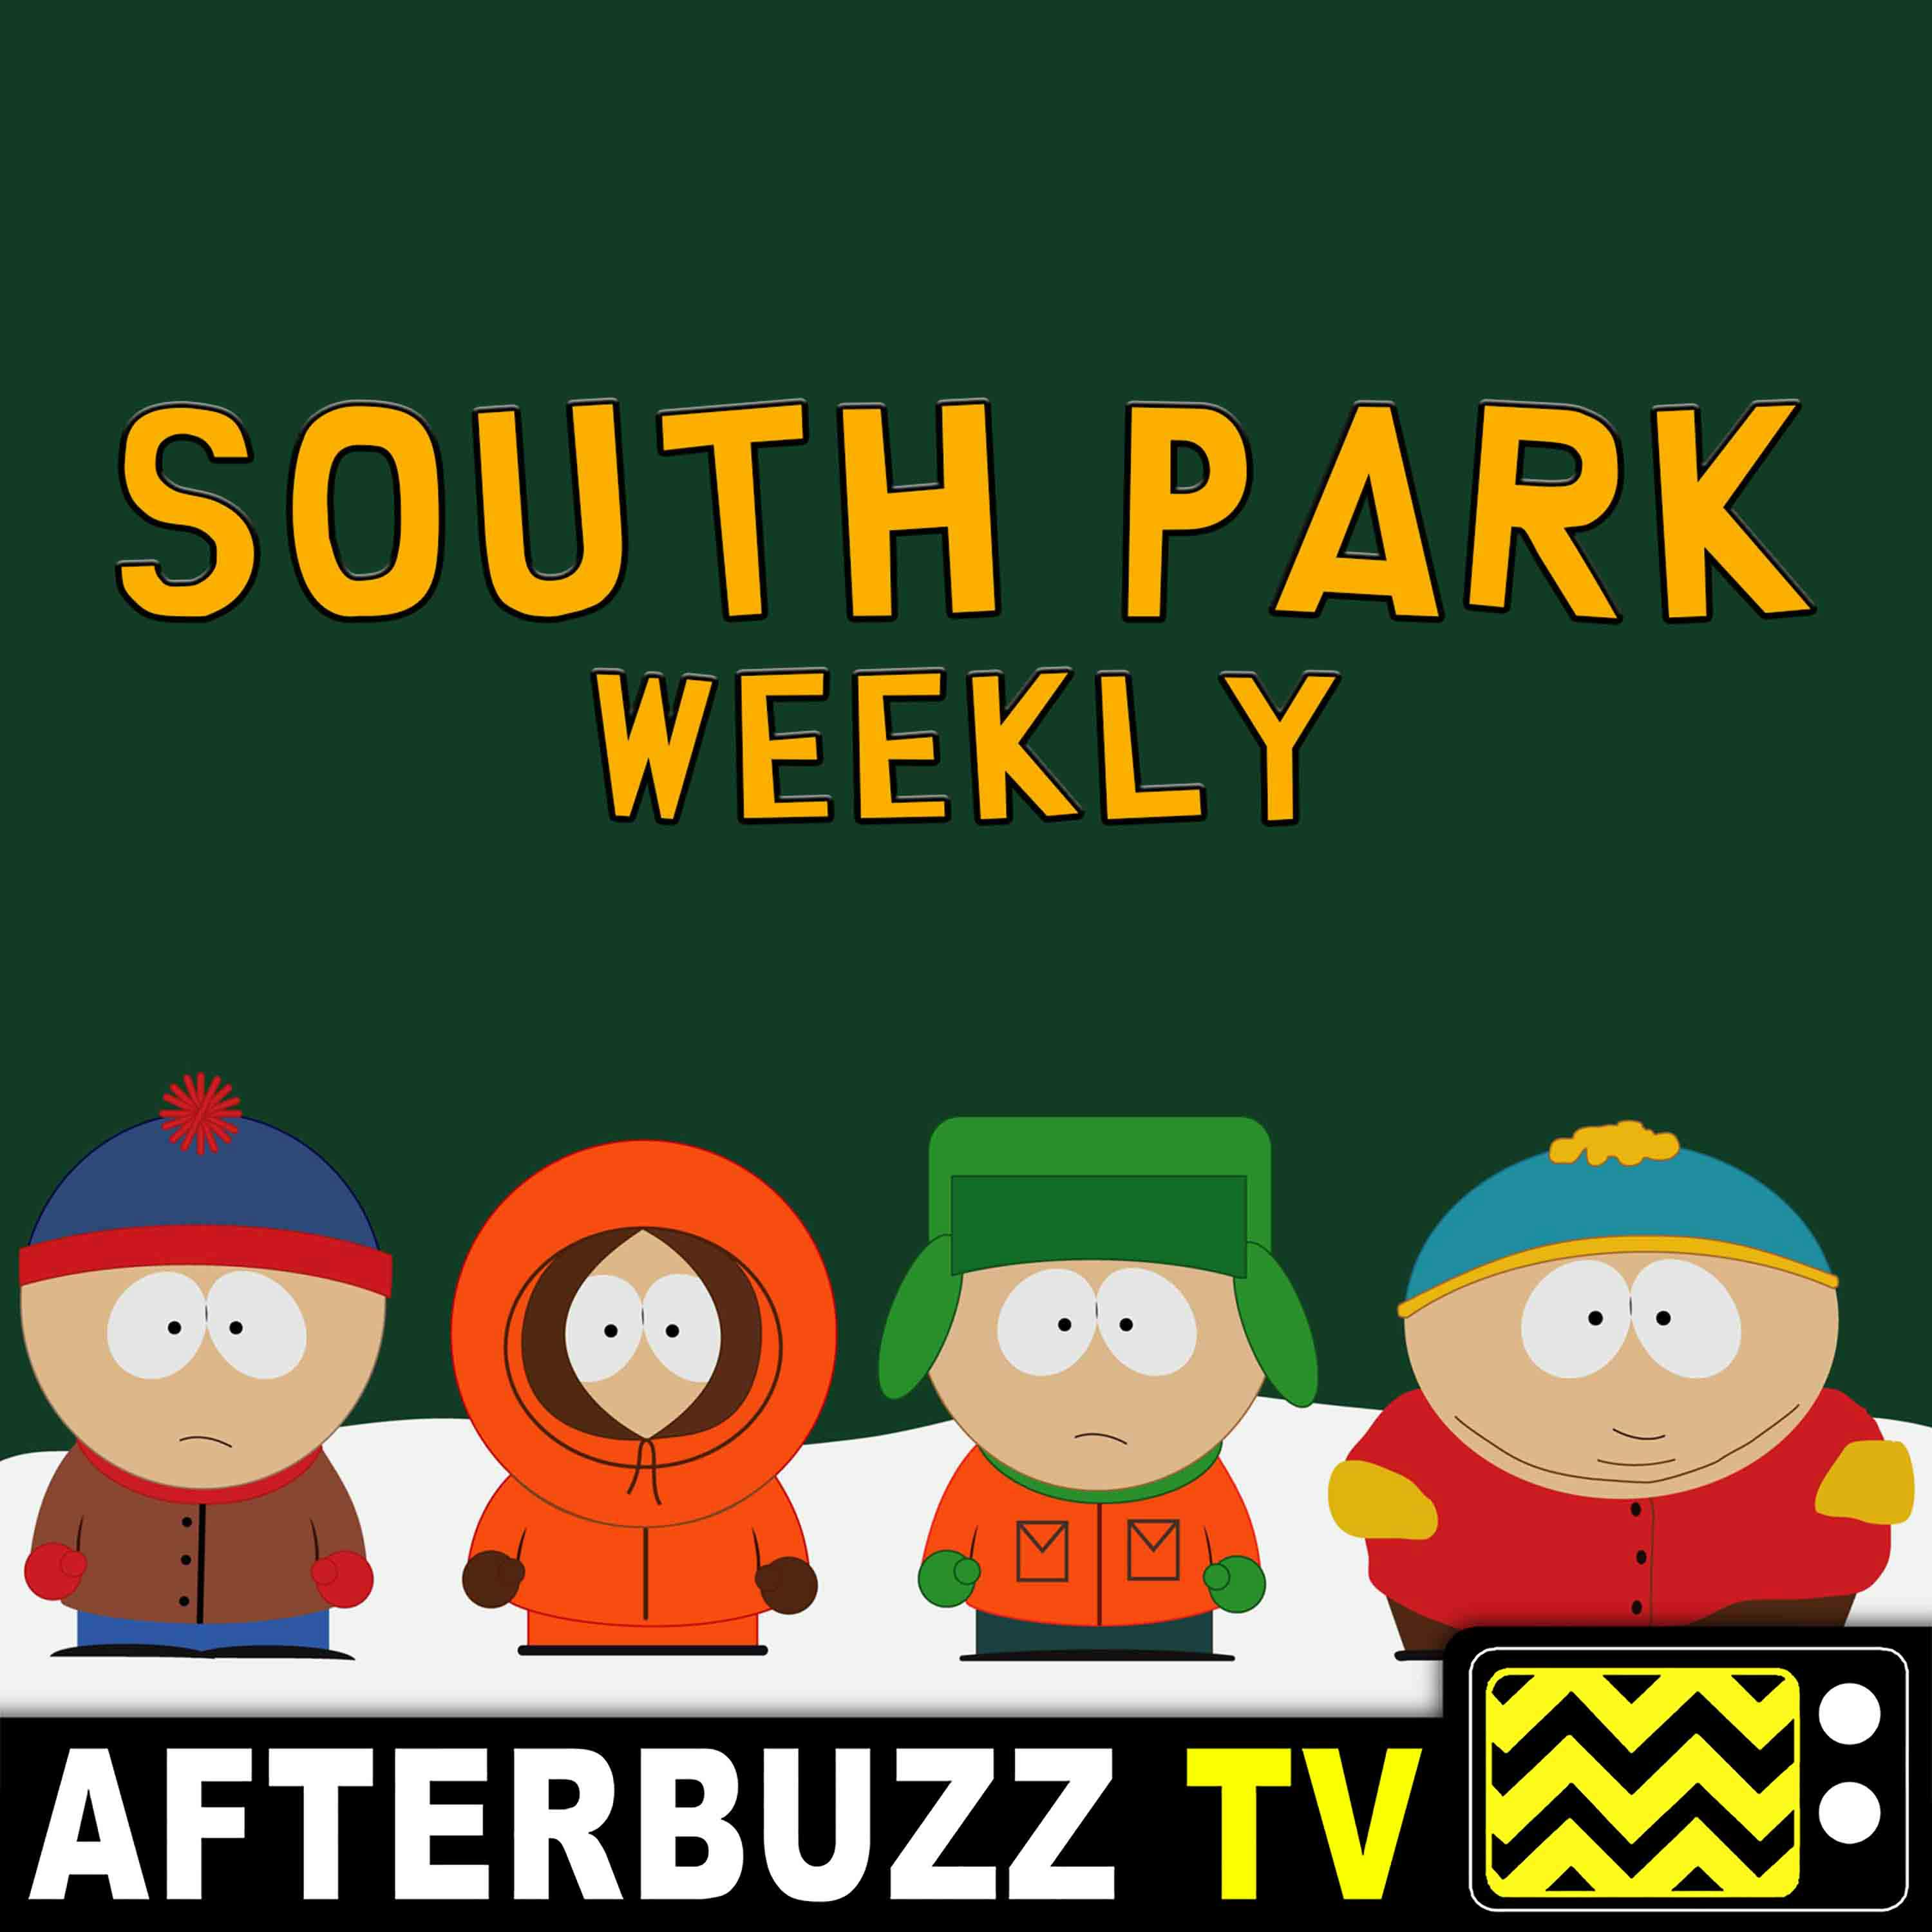 South Park S:22 The Problem with a Poo E:3